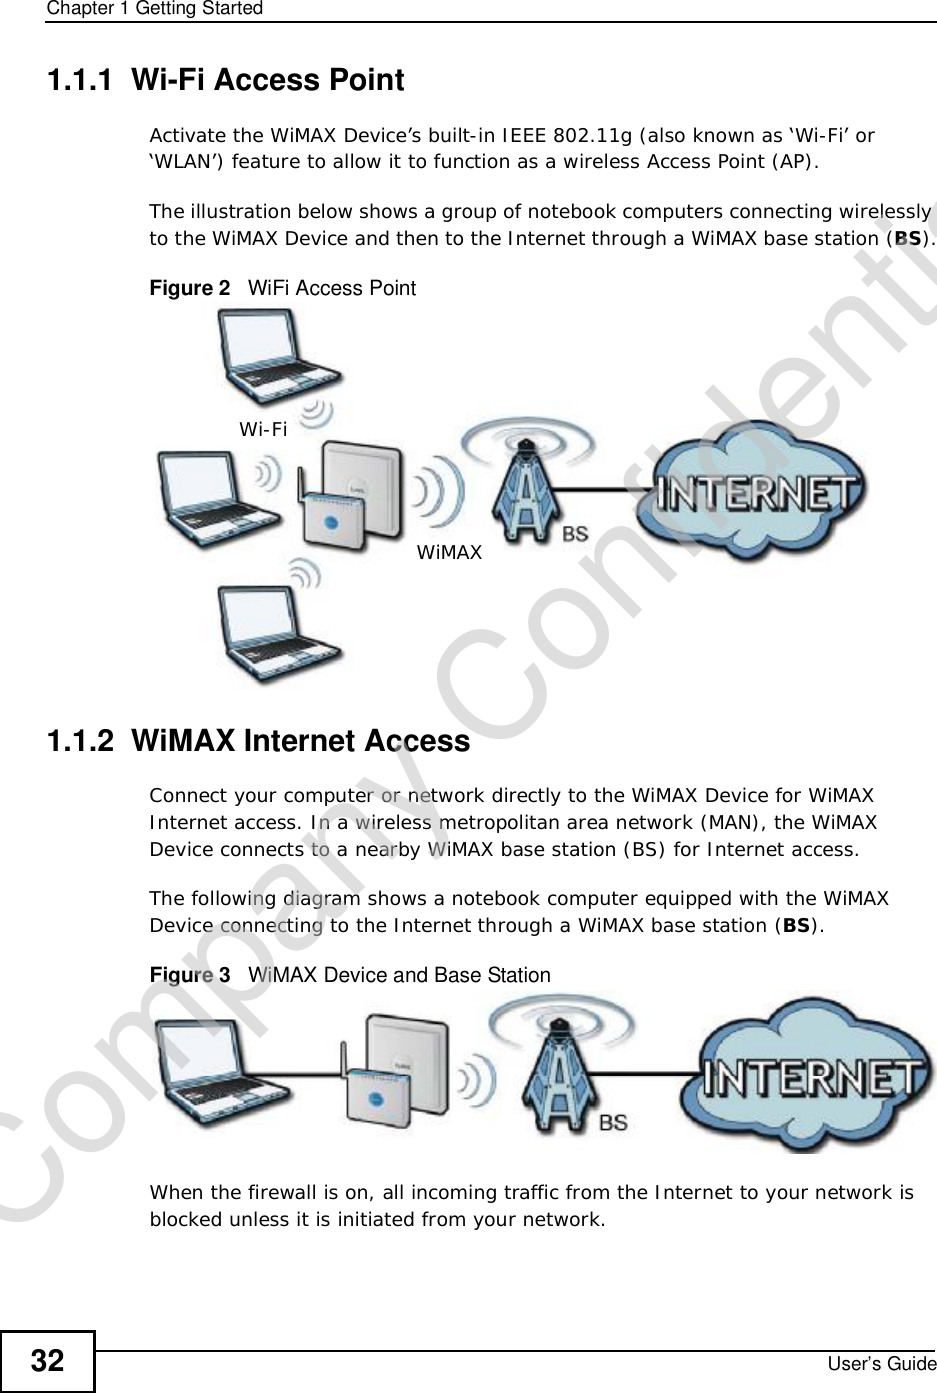 Chapter 1Getting StartedUser’s Guide321.1.1  Wi-Fi Access PointActivate the WiMAX Device’s built-in IEEE 802.11g (also known as ‘Wi-Fi’ or ‘WLAN’) feature to allow it to function as a wireless Access Point (AP).The illustration below shows a group of notebook computers connecting wirelessly to the WiMAX Device and then to the Internet through a WiMAX base station (BS).Figure 2   WiFi Access Point1.1.2  WiMAX Internet AccessConnect your computer or network directly to the WiMAX Device for WiMAX Internet access. In a wireless metropolitan area network (MAN), the WiMAX Device connects to a nearby WiMAX base station (BS) for Internet access. The following diagram shows a notebook computer equipped with the WiMAX Device connecting to the Internet through a WiMAX base station (BS).Figure 3   WiMAX Device and Base StationWhen the firewall is on, all incoming traffic from the Internet to your network is blocked unless it is initiated from your network. Wi-FiWiMAXCompany Confidential